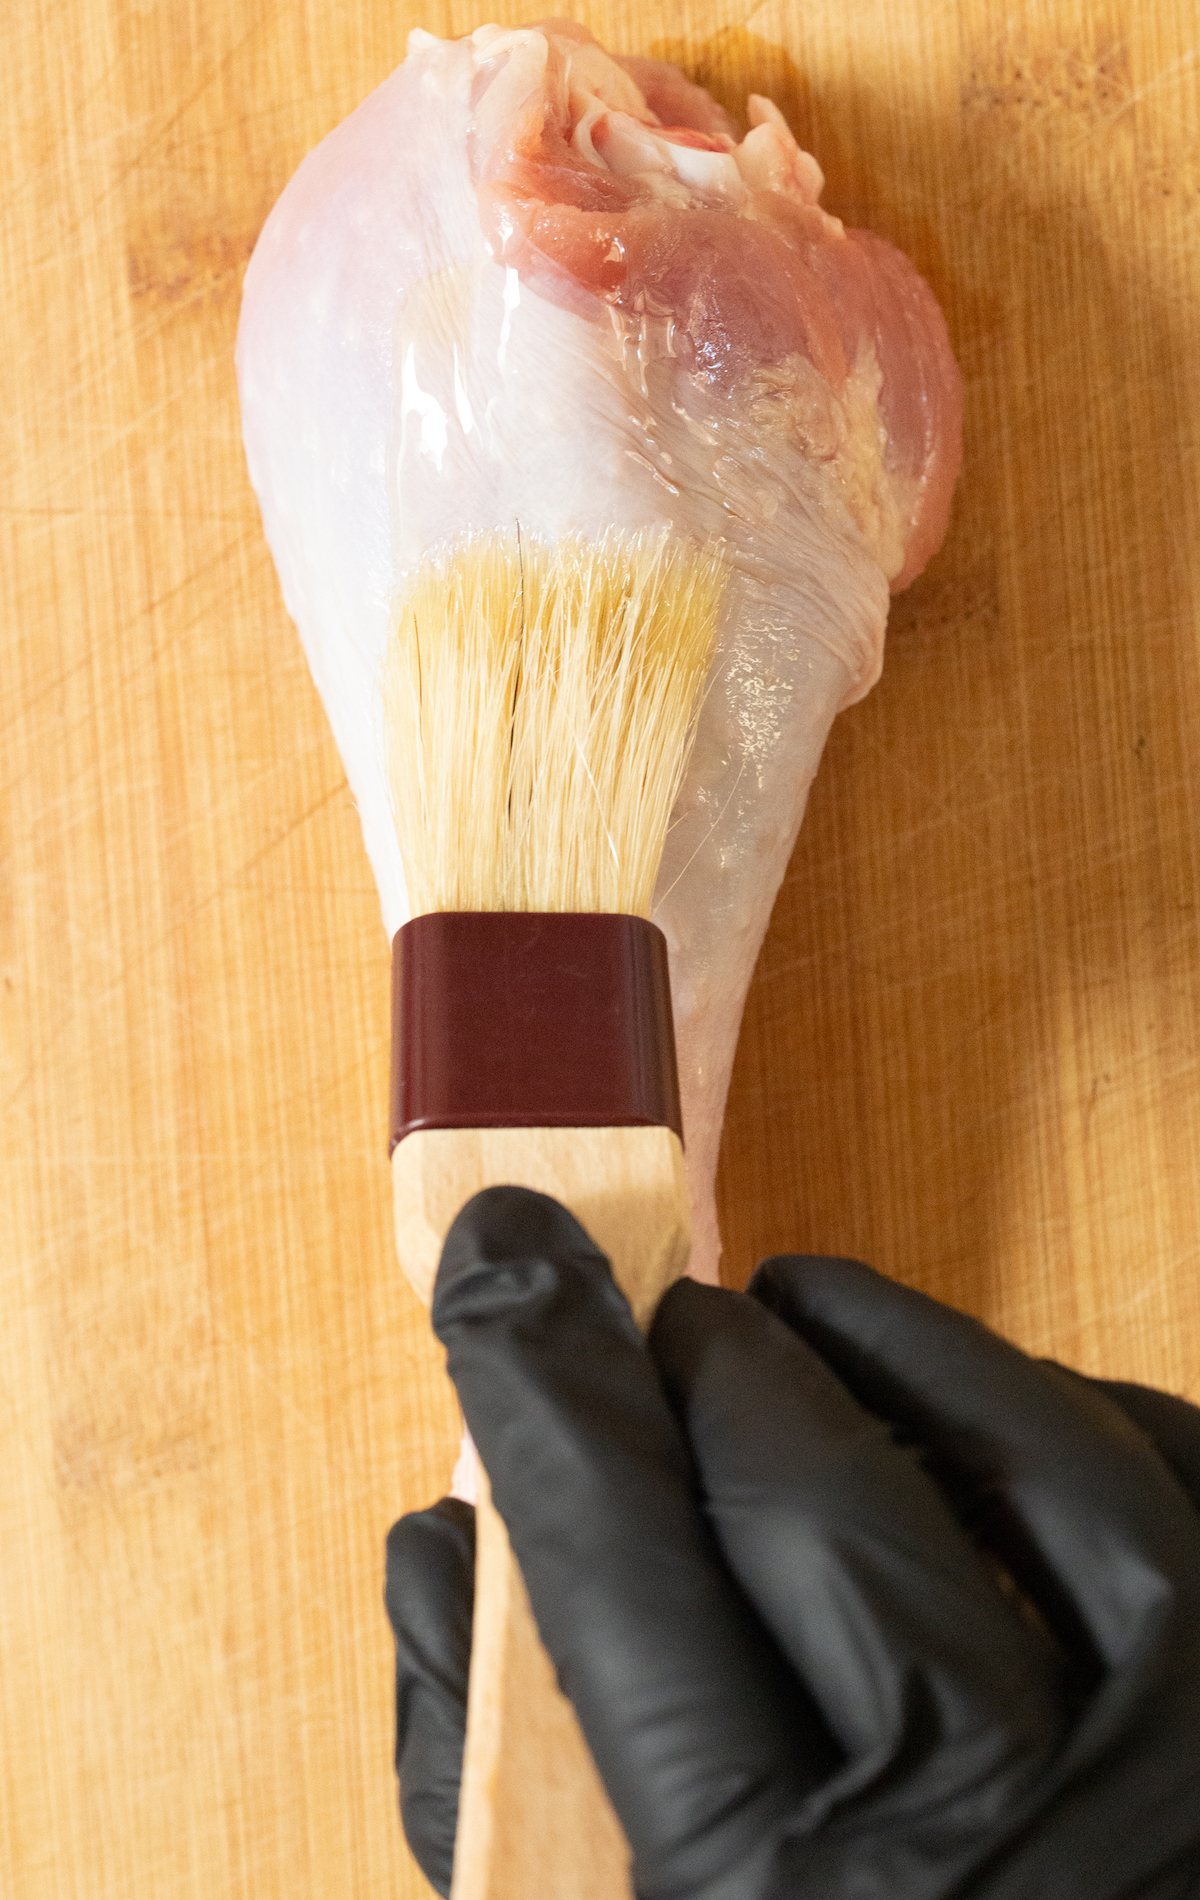 A raw turkey leg being brushed with oil via a pastry brush.